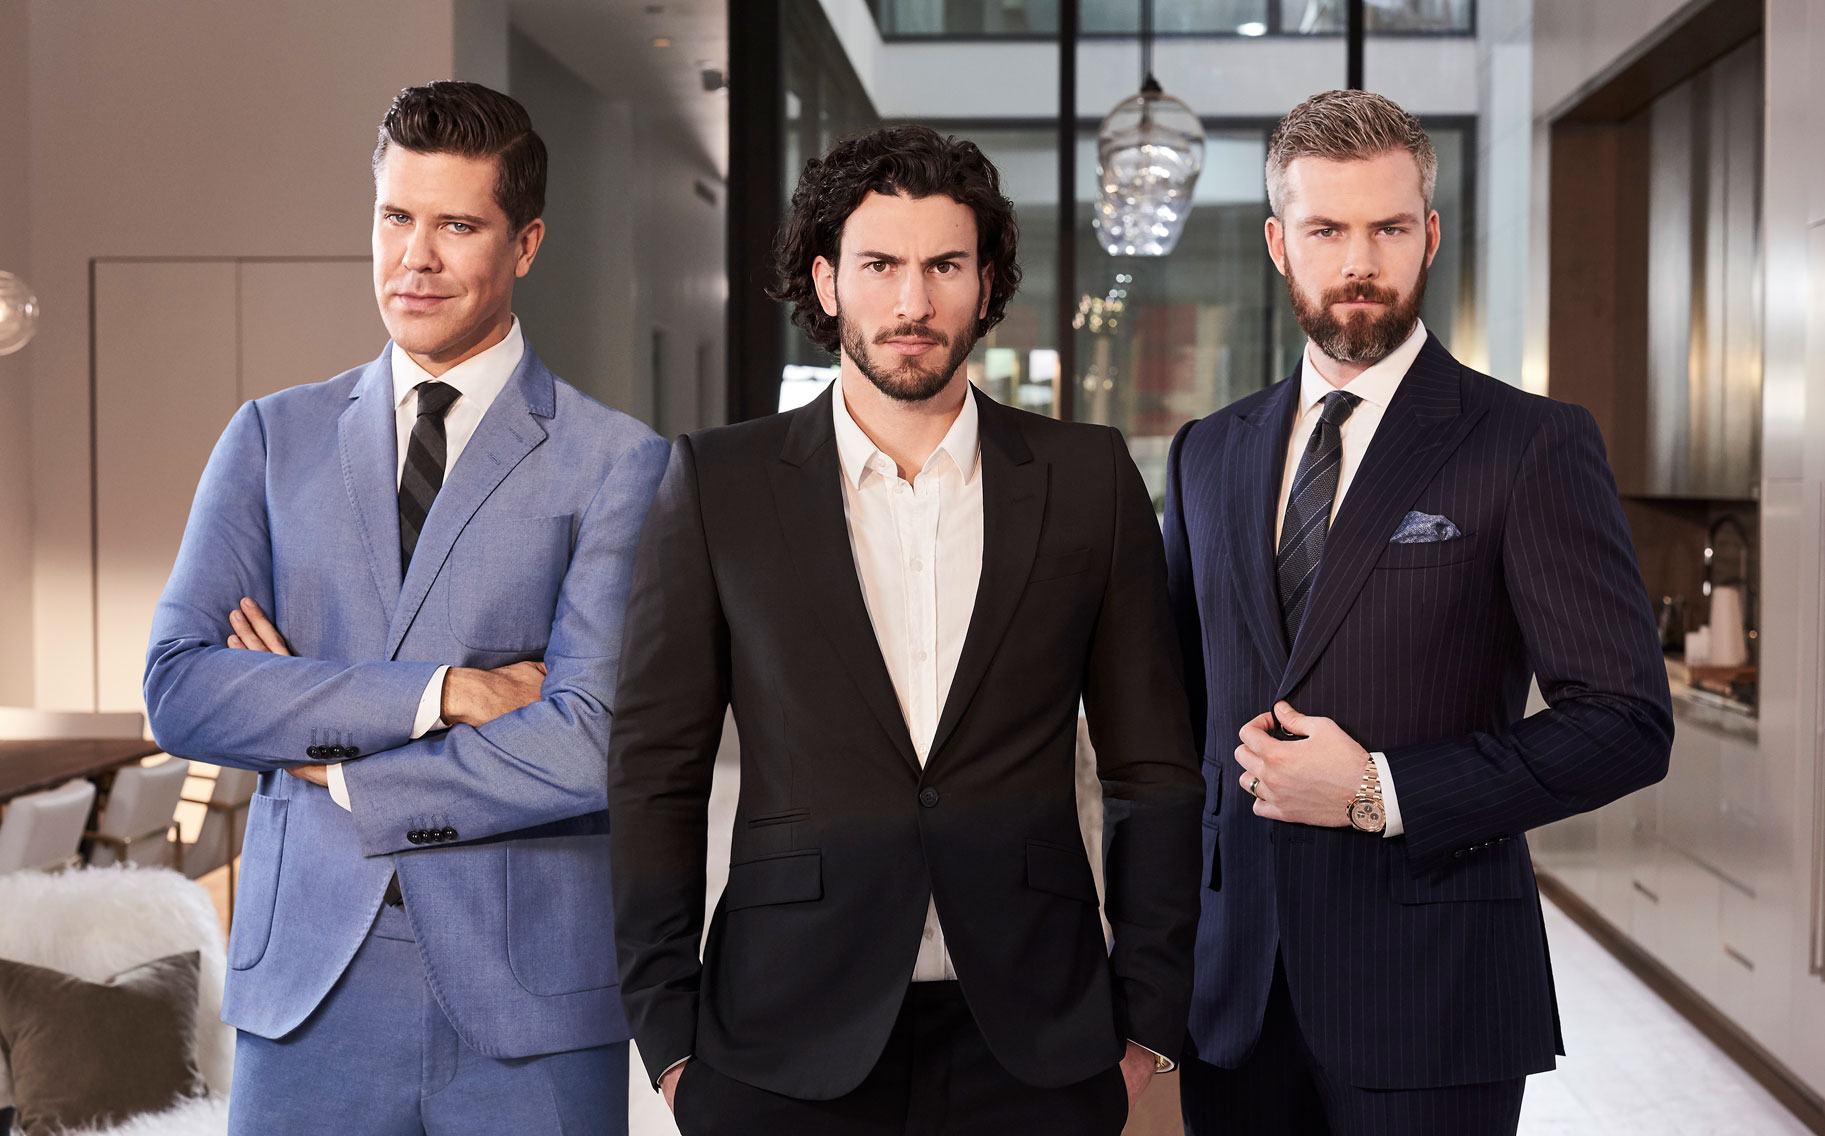 Nearly All of the 'Million Dollar Listing New York' Cast Members